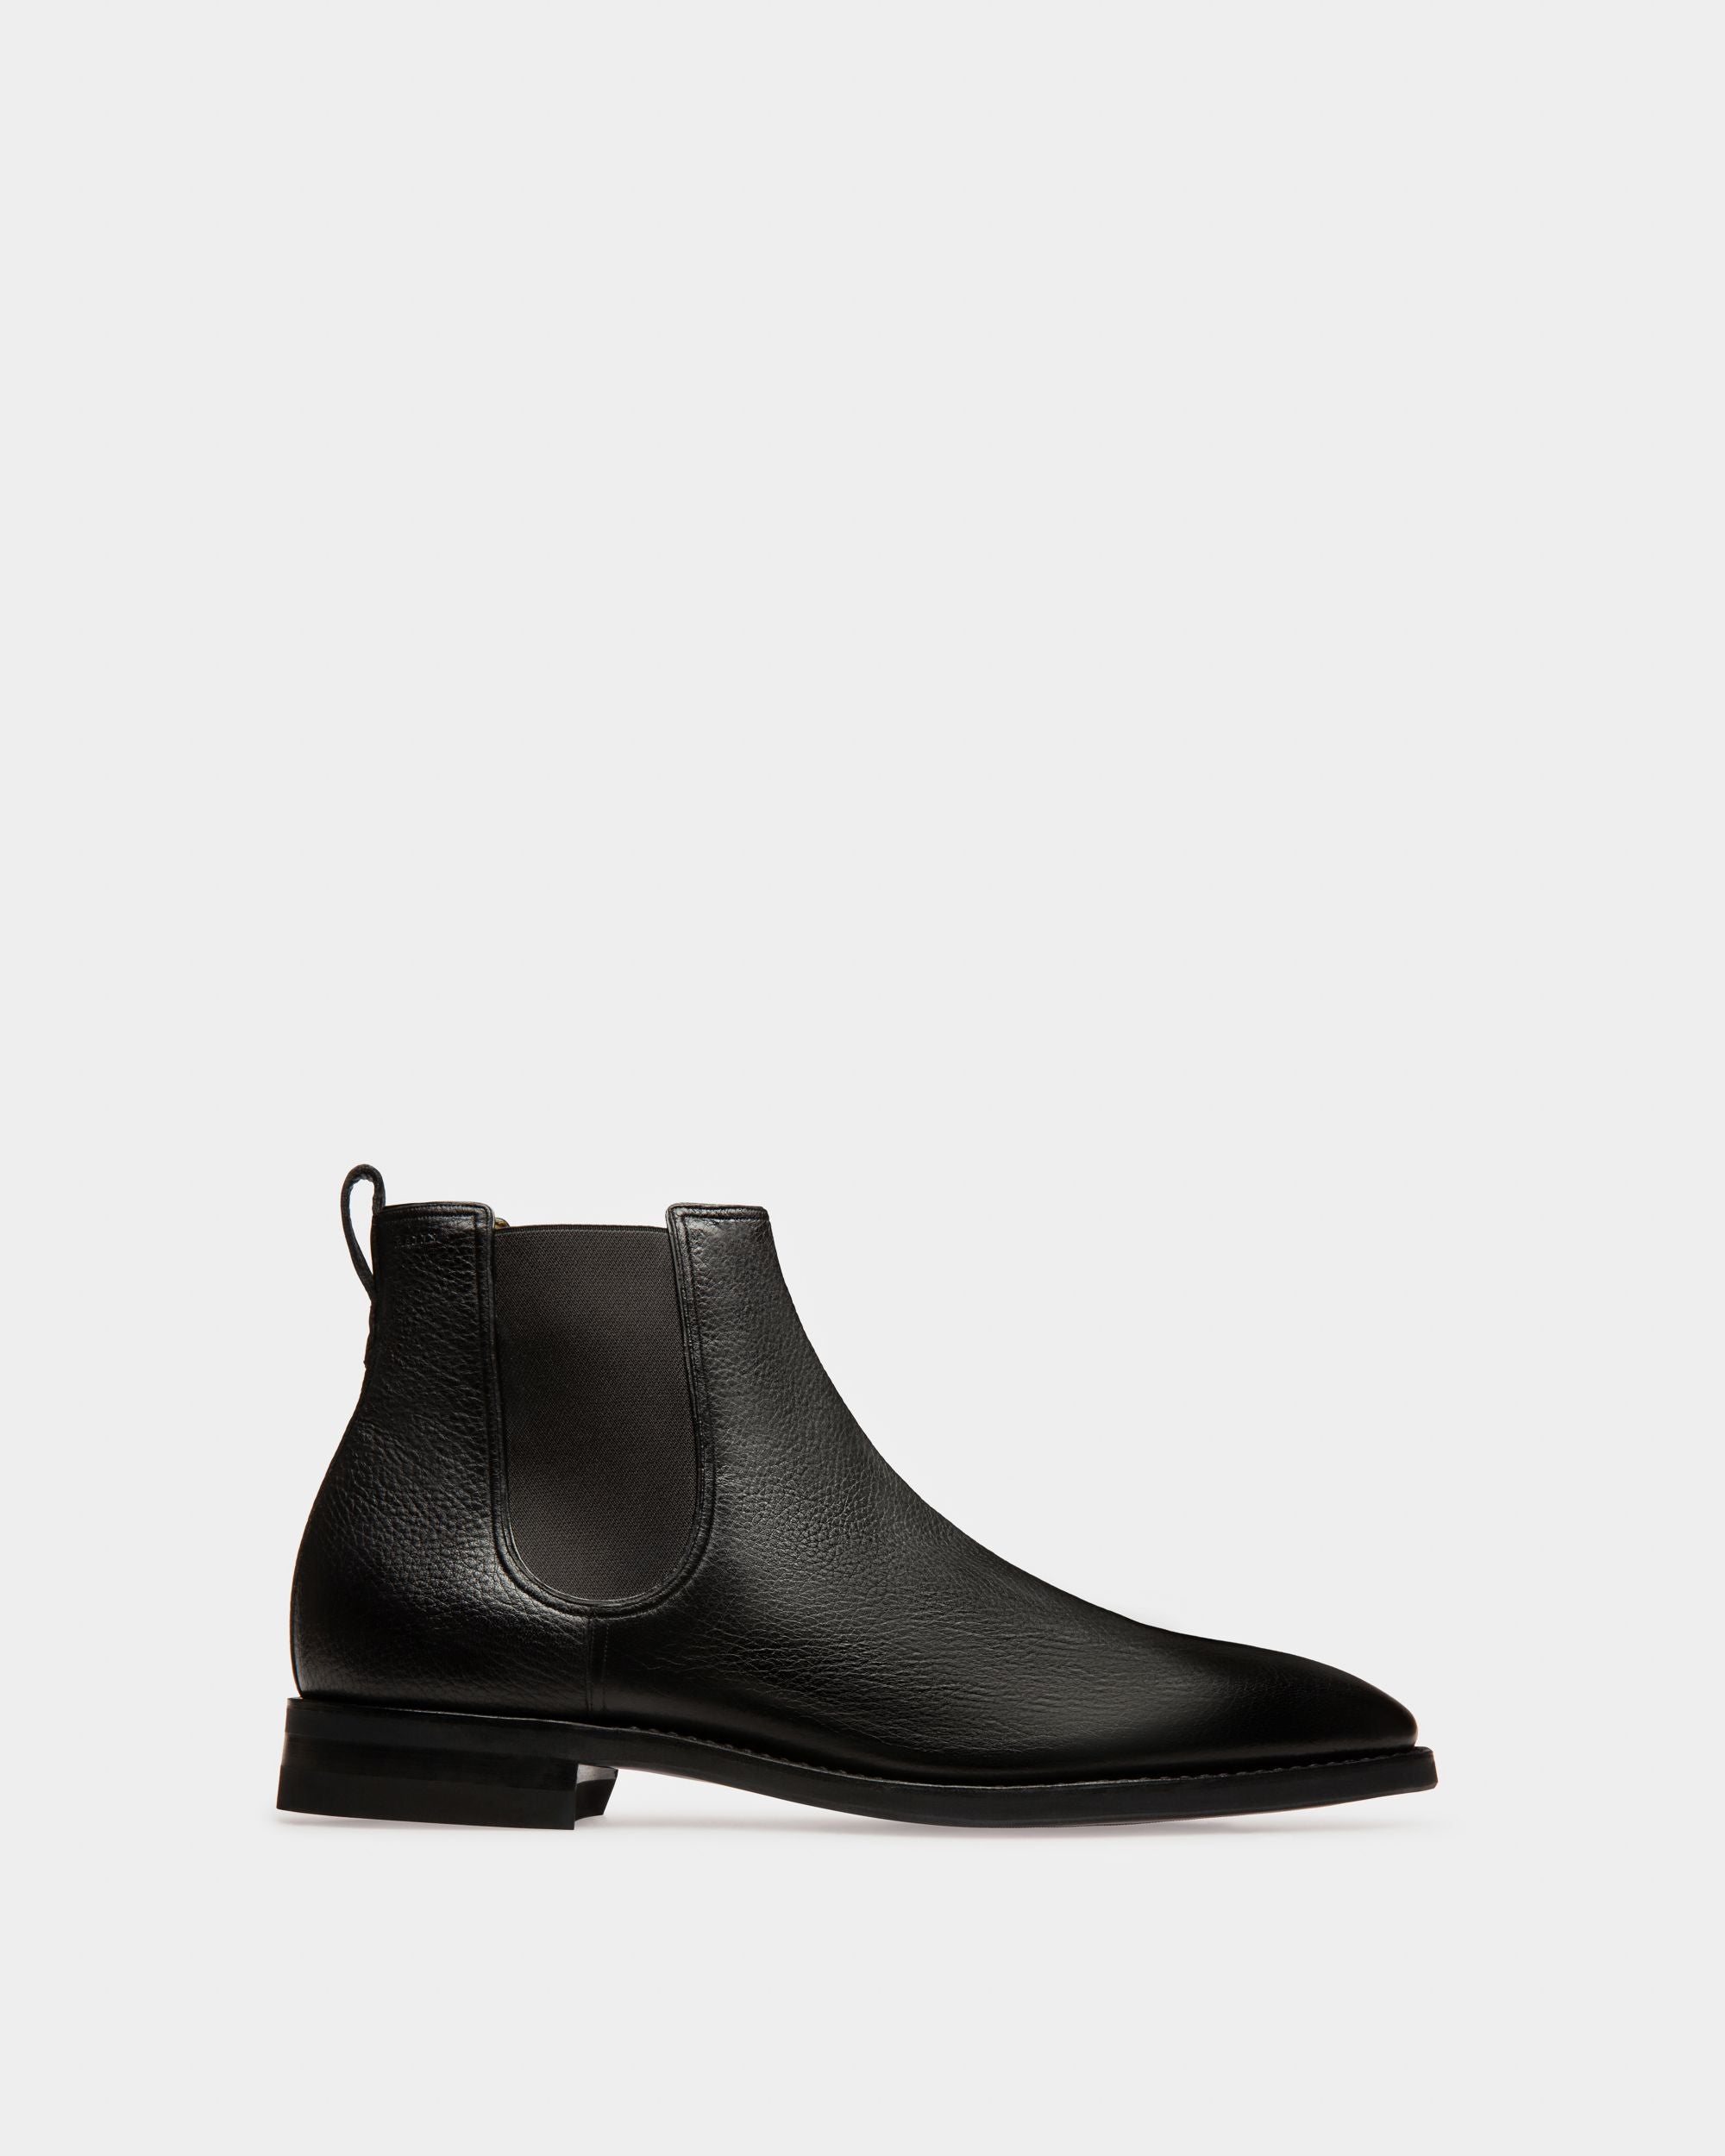 Scavone | Men's Boots | Black Leather | Bally | Still Life Side